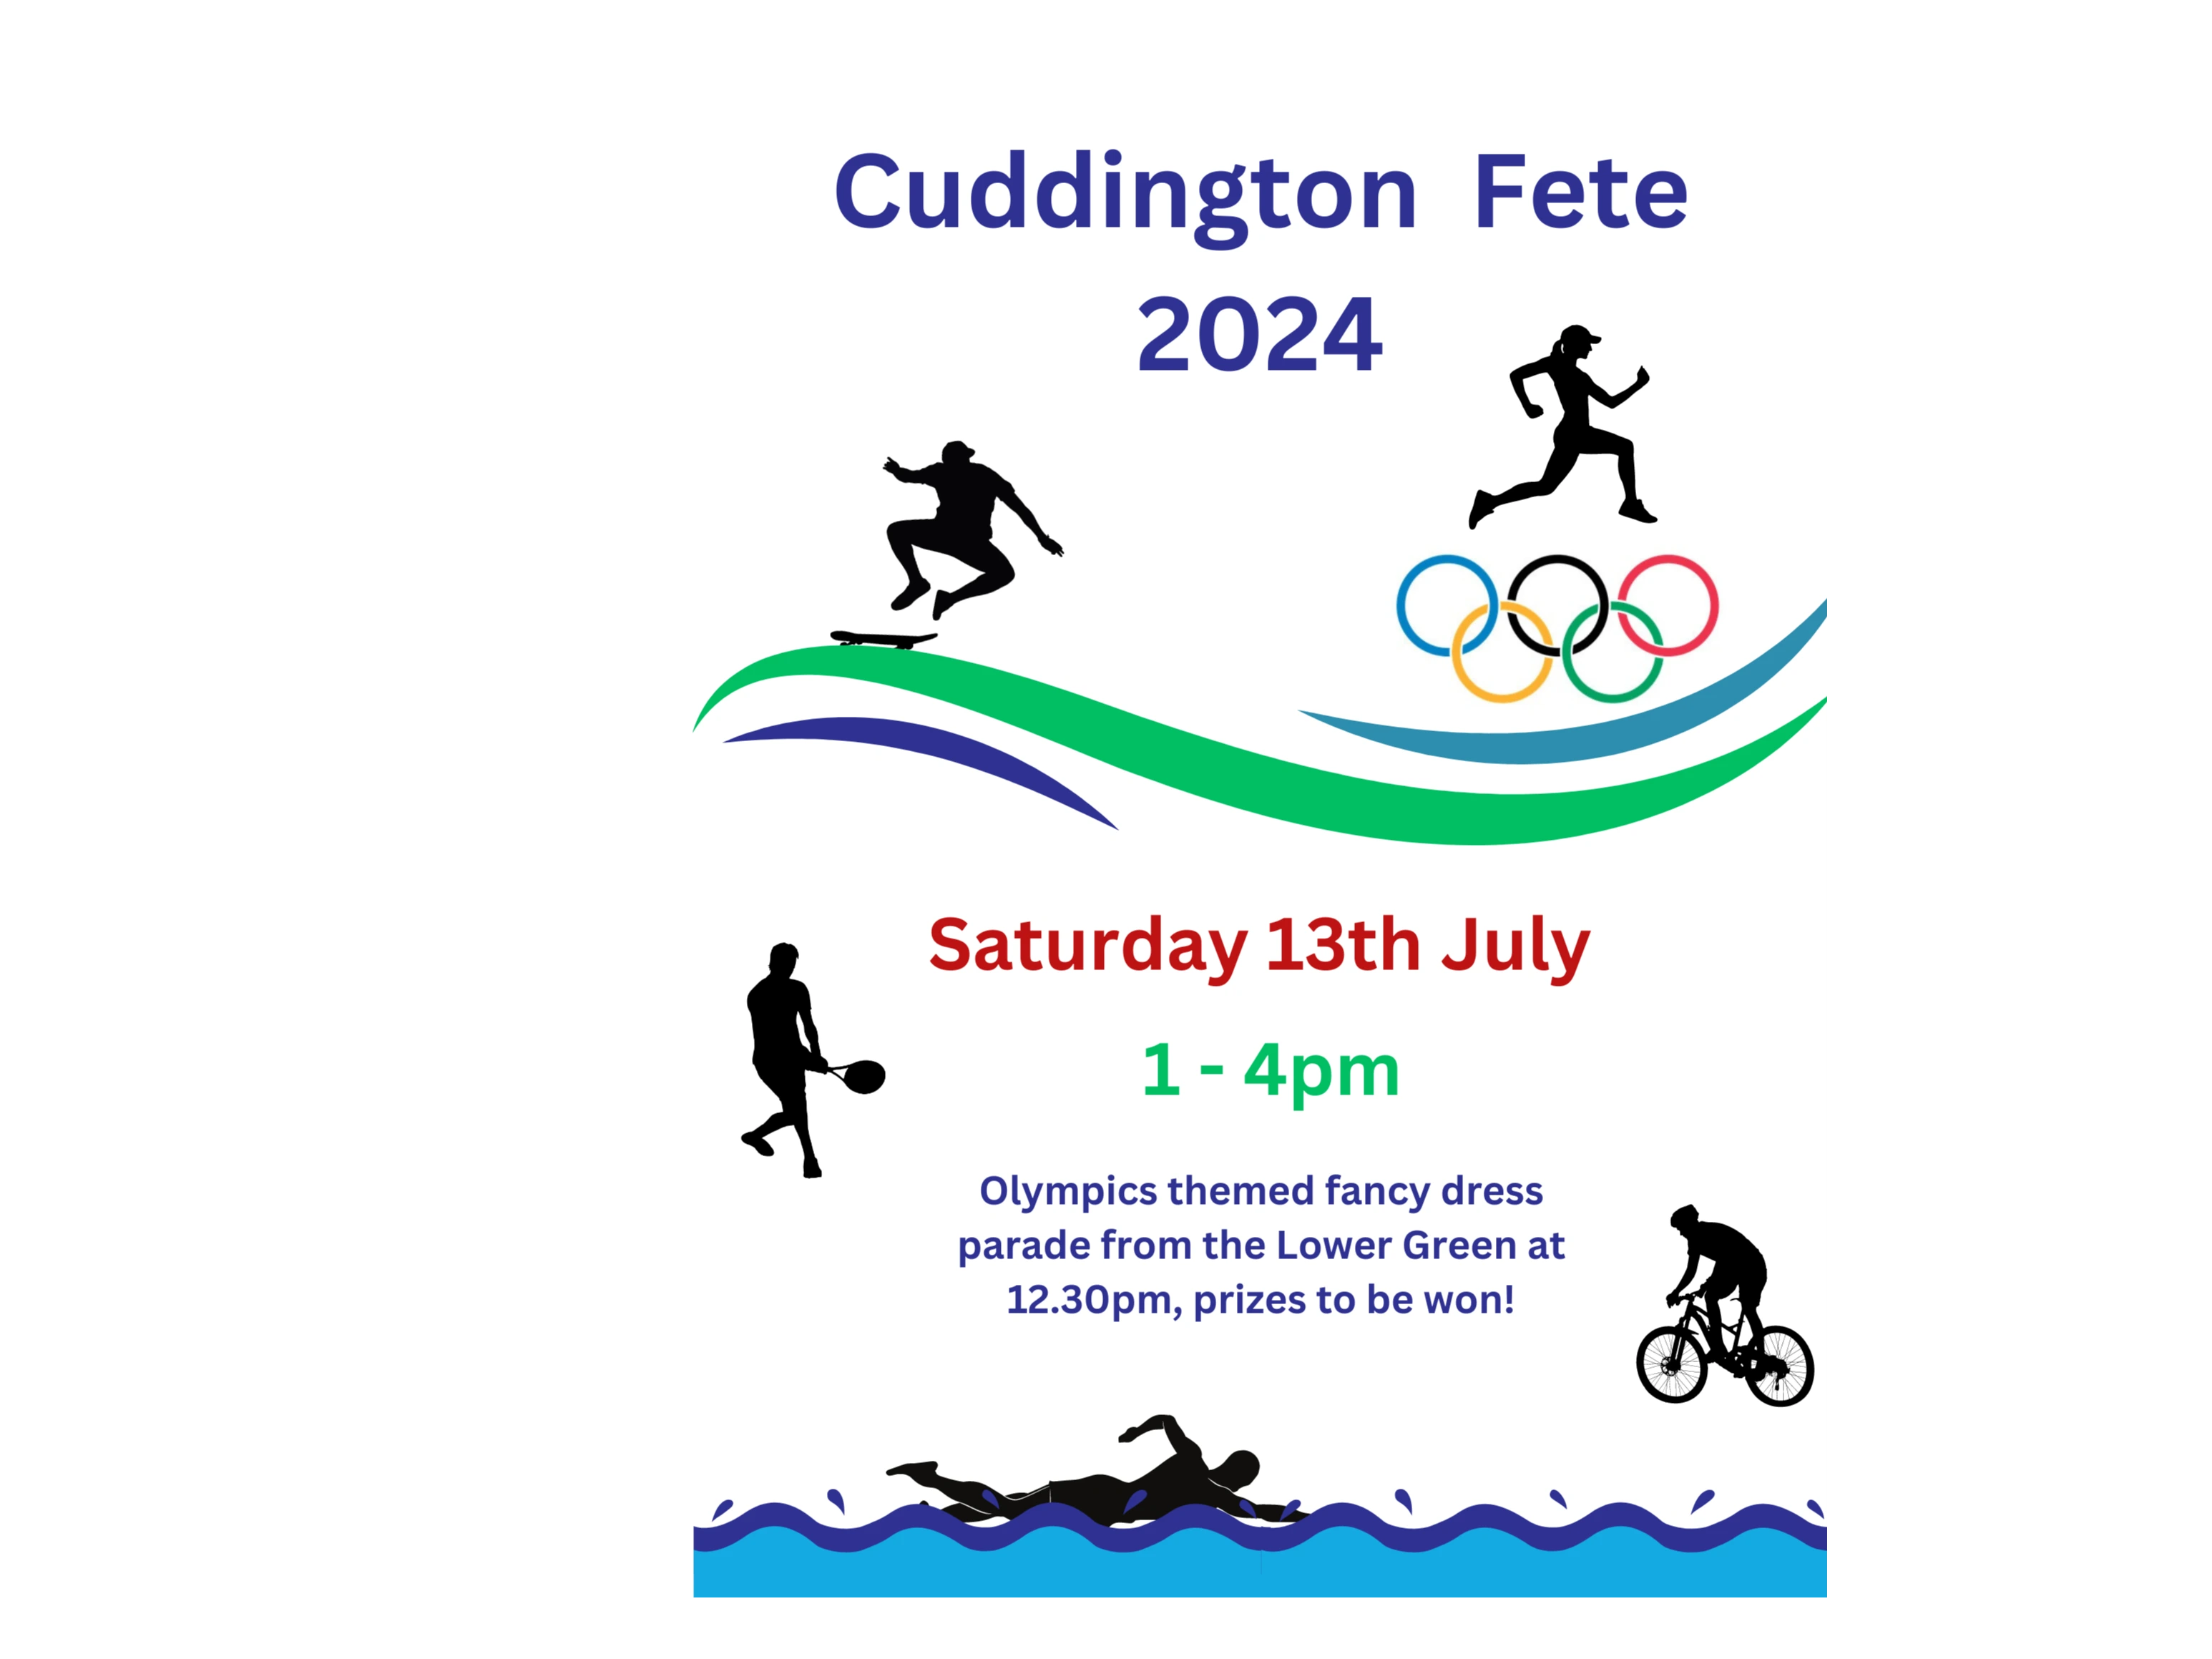 Join us on July 13th at the Cuddington Fete